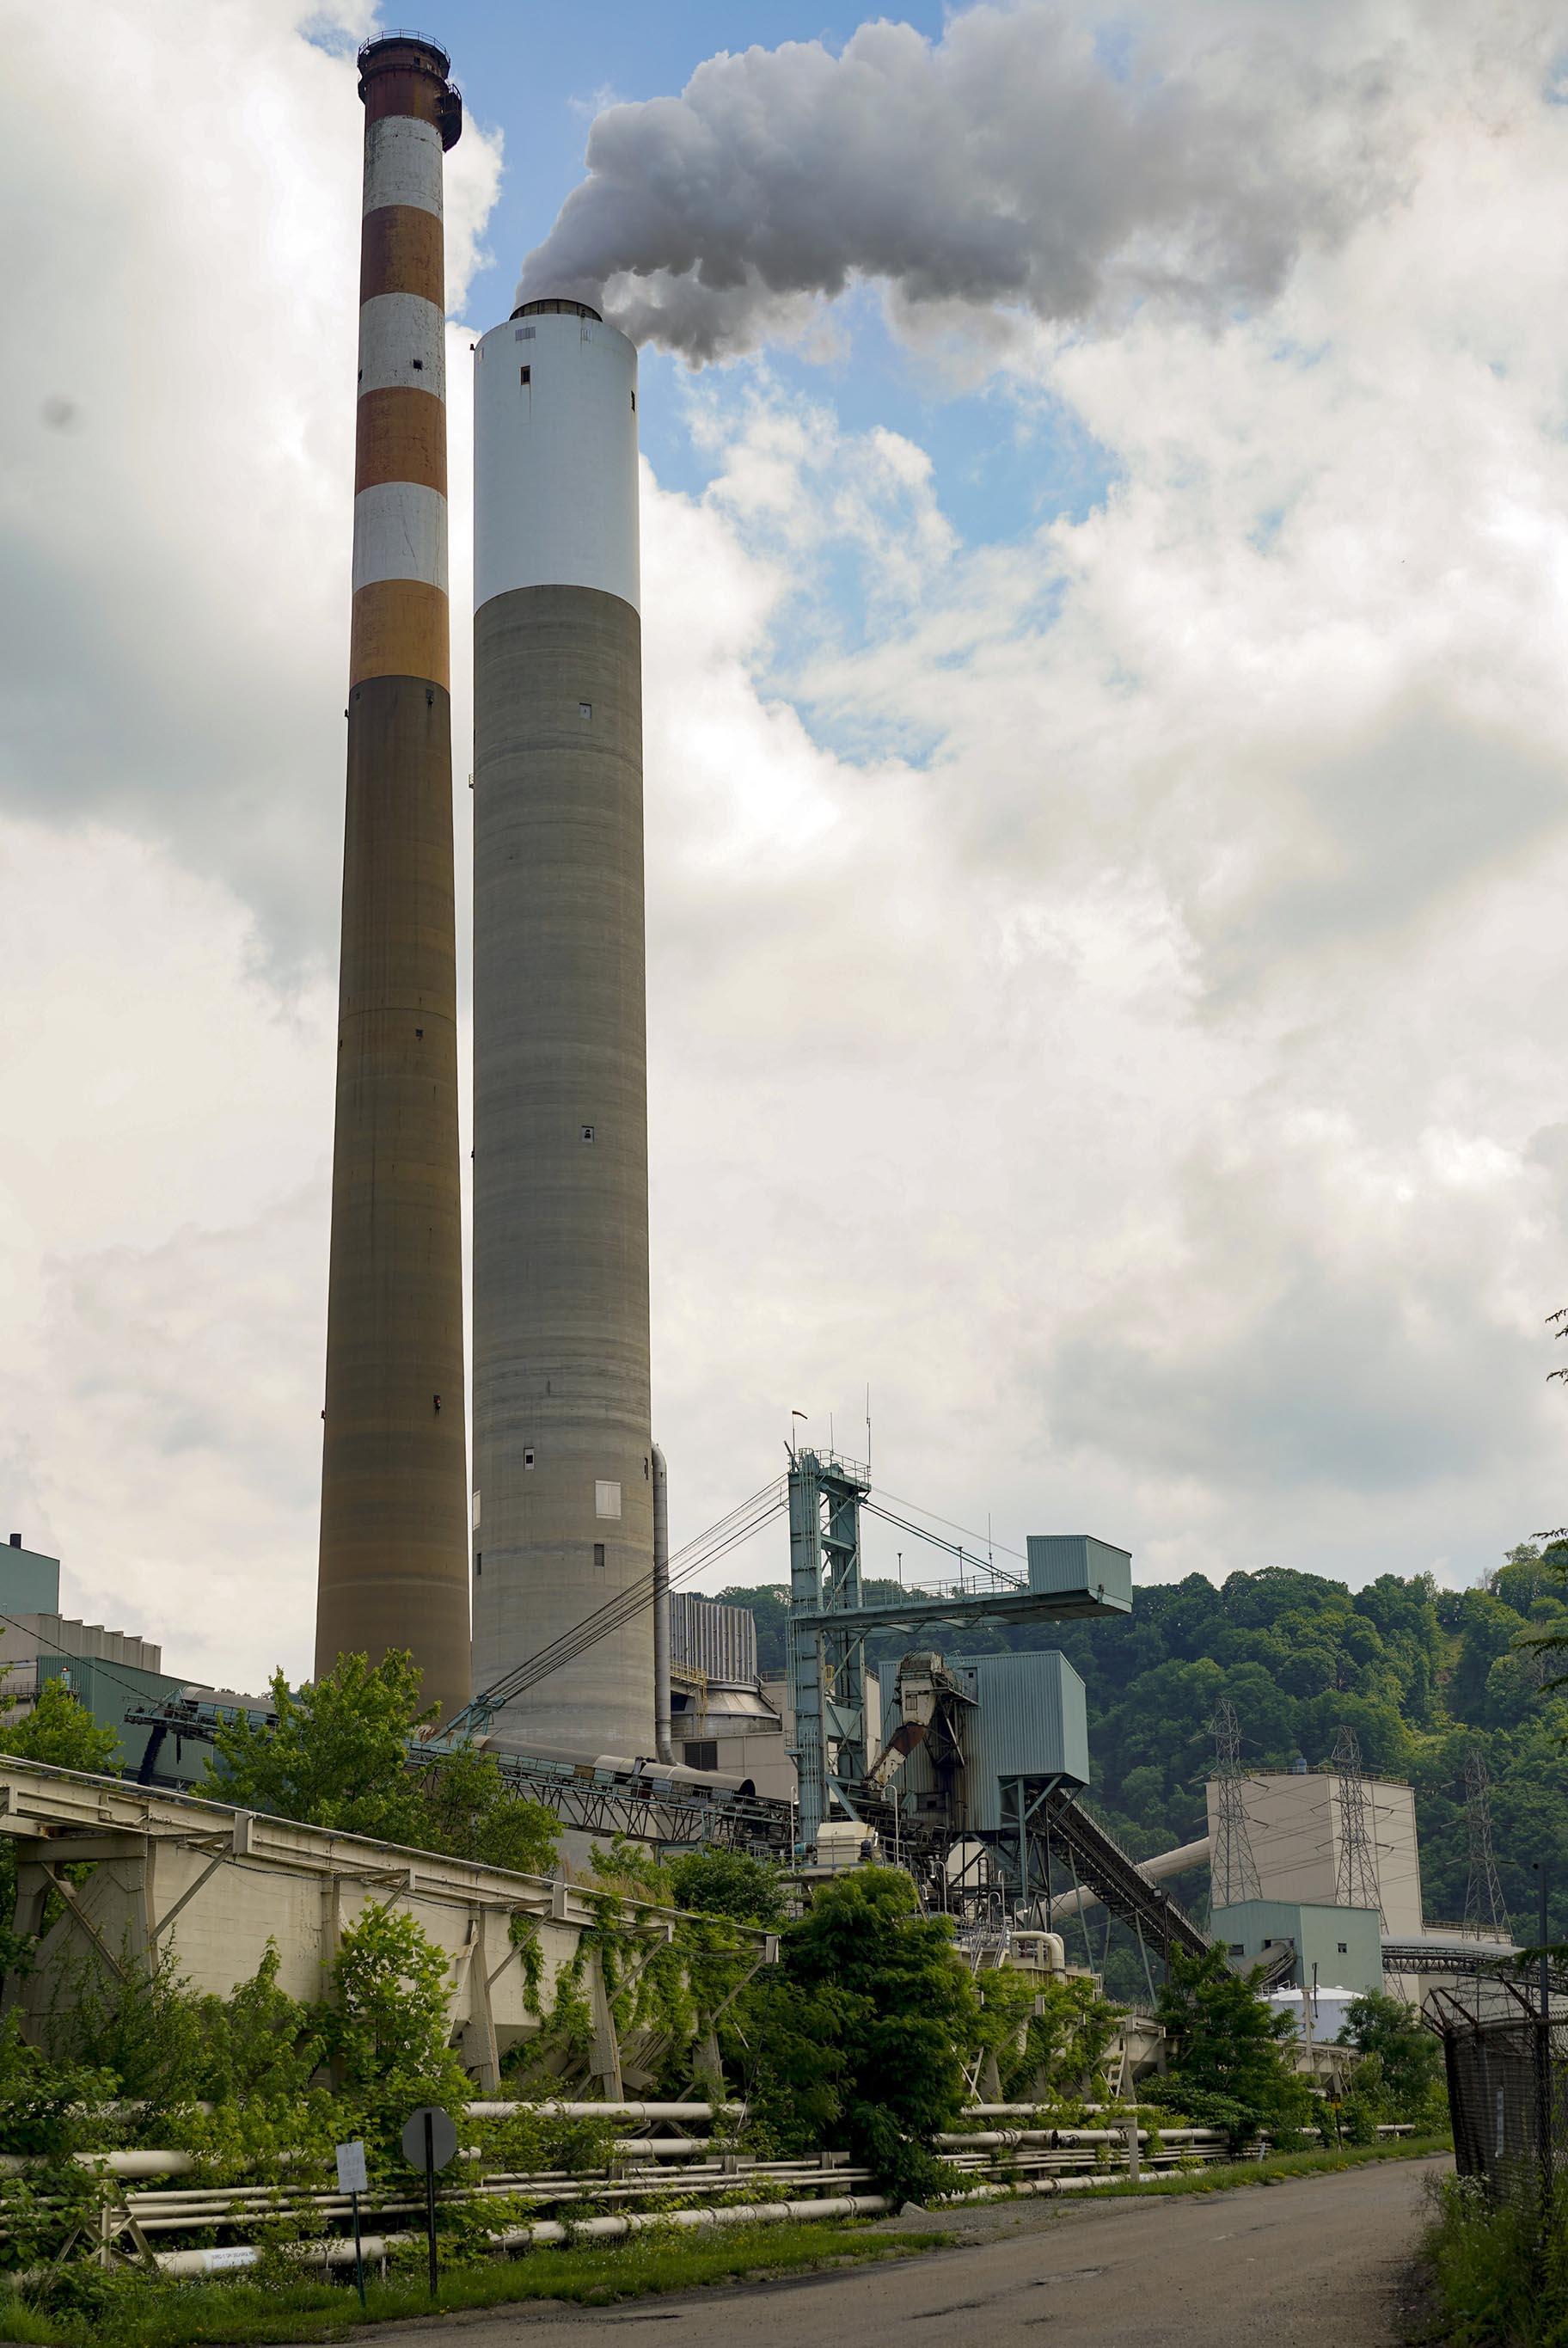 Pennsylvania on Saturday becomes the first major fossil fuel-producing state in the U.S. to adopt a carbon pricing policy to address climate change. It joins 11 states where coal, oil and natural gas power plants must buy credits for every ton of carbon dioxide they emit.